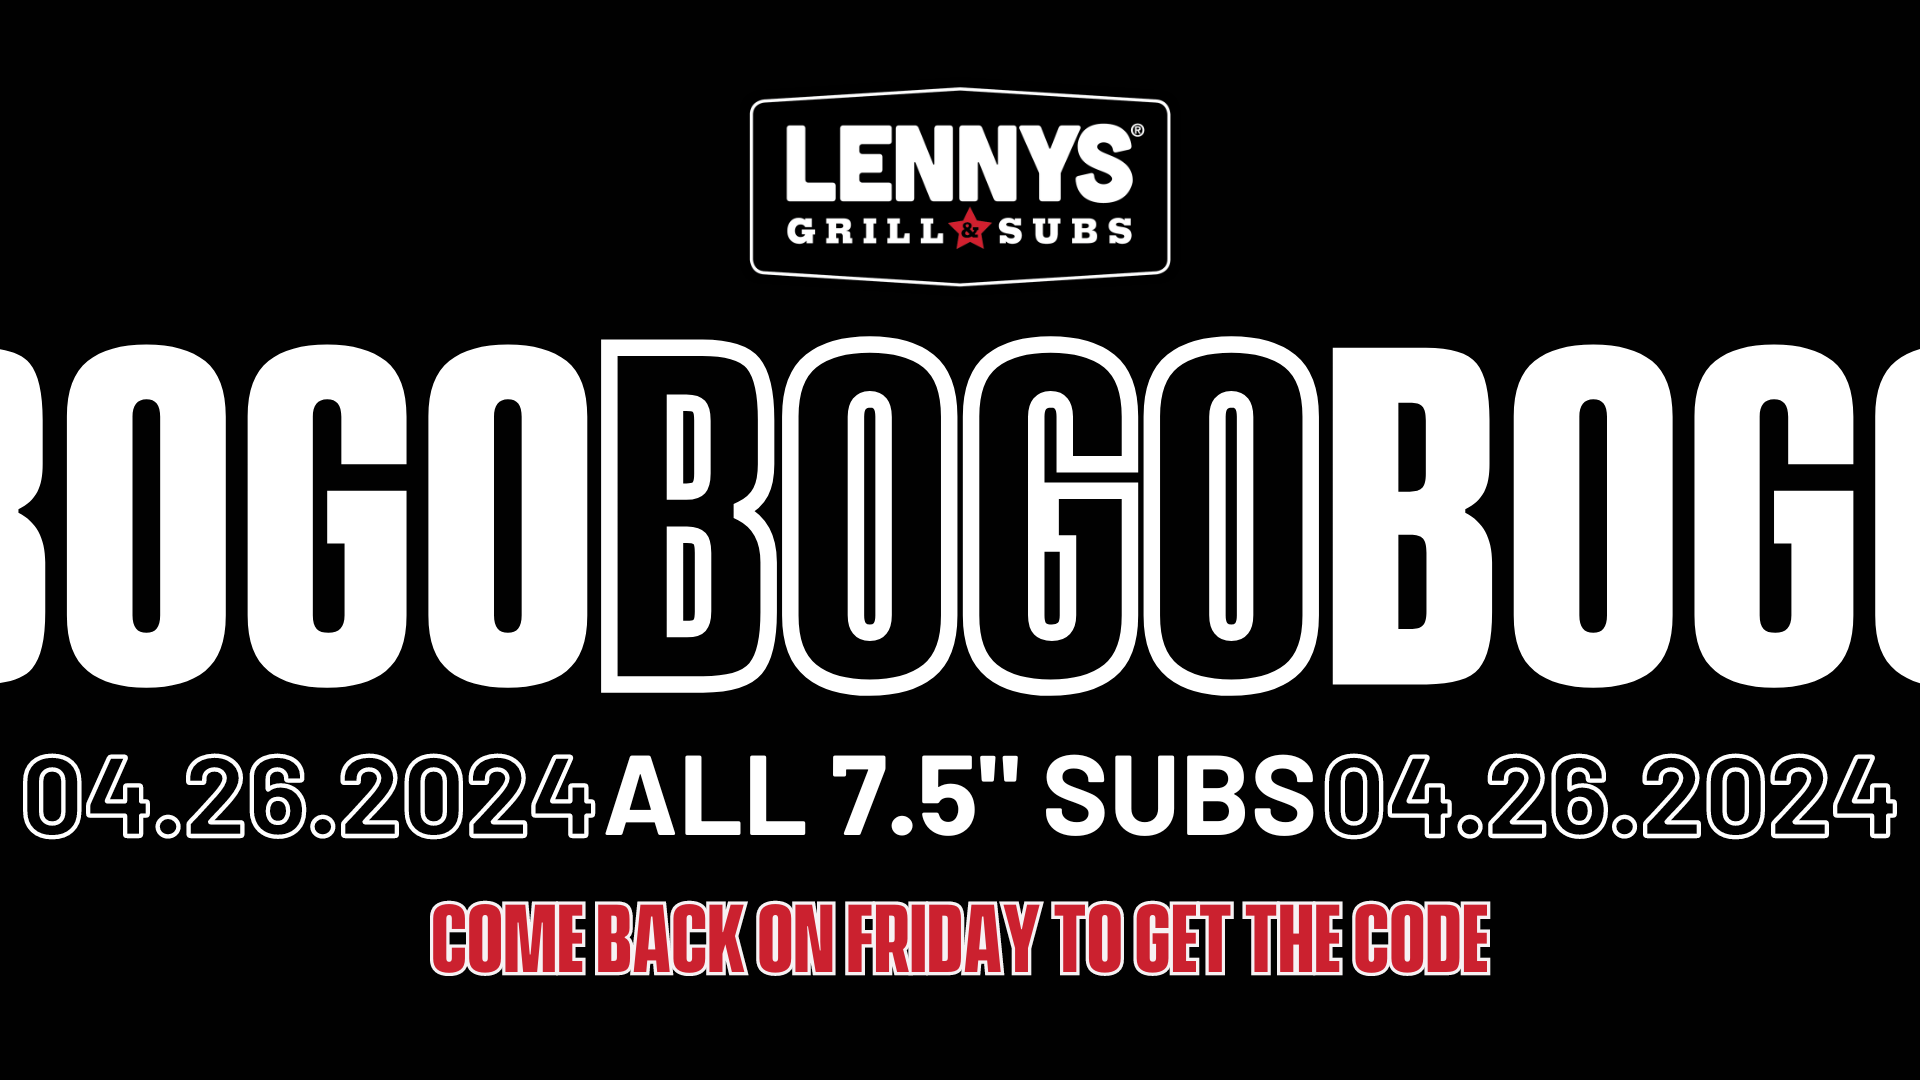 Lennys BOBO - Buy 1, Get 1 All 7.5 Inch Subs - Ends April 26, 2024